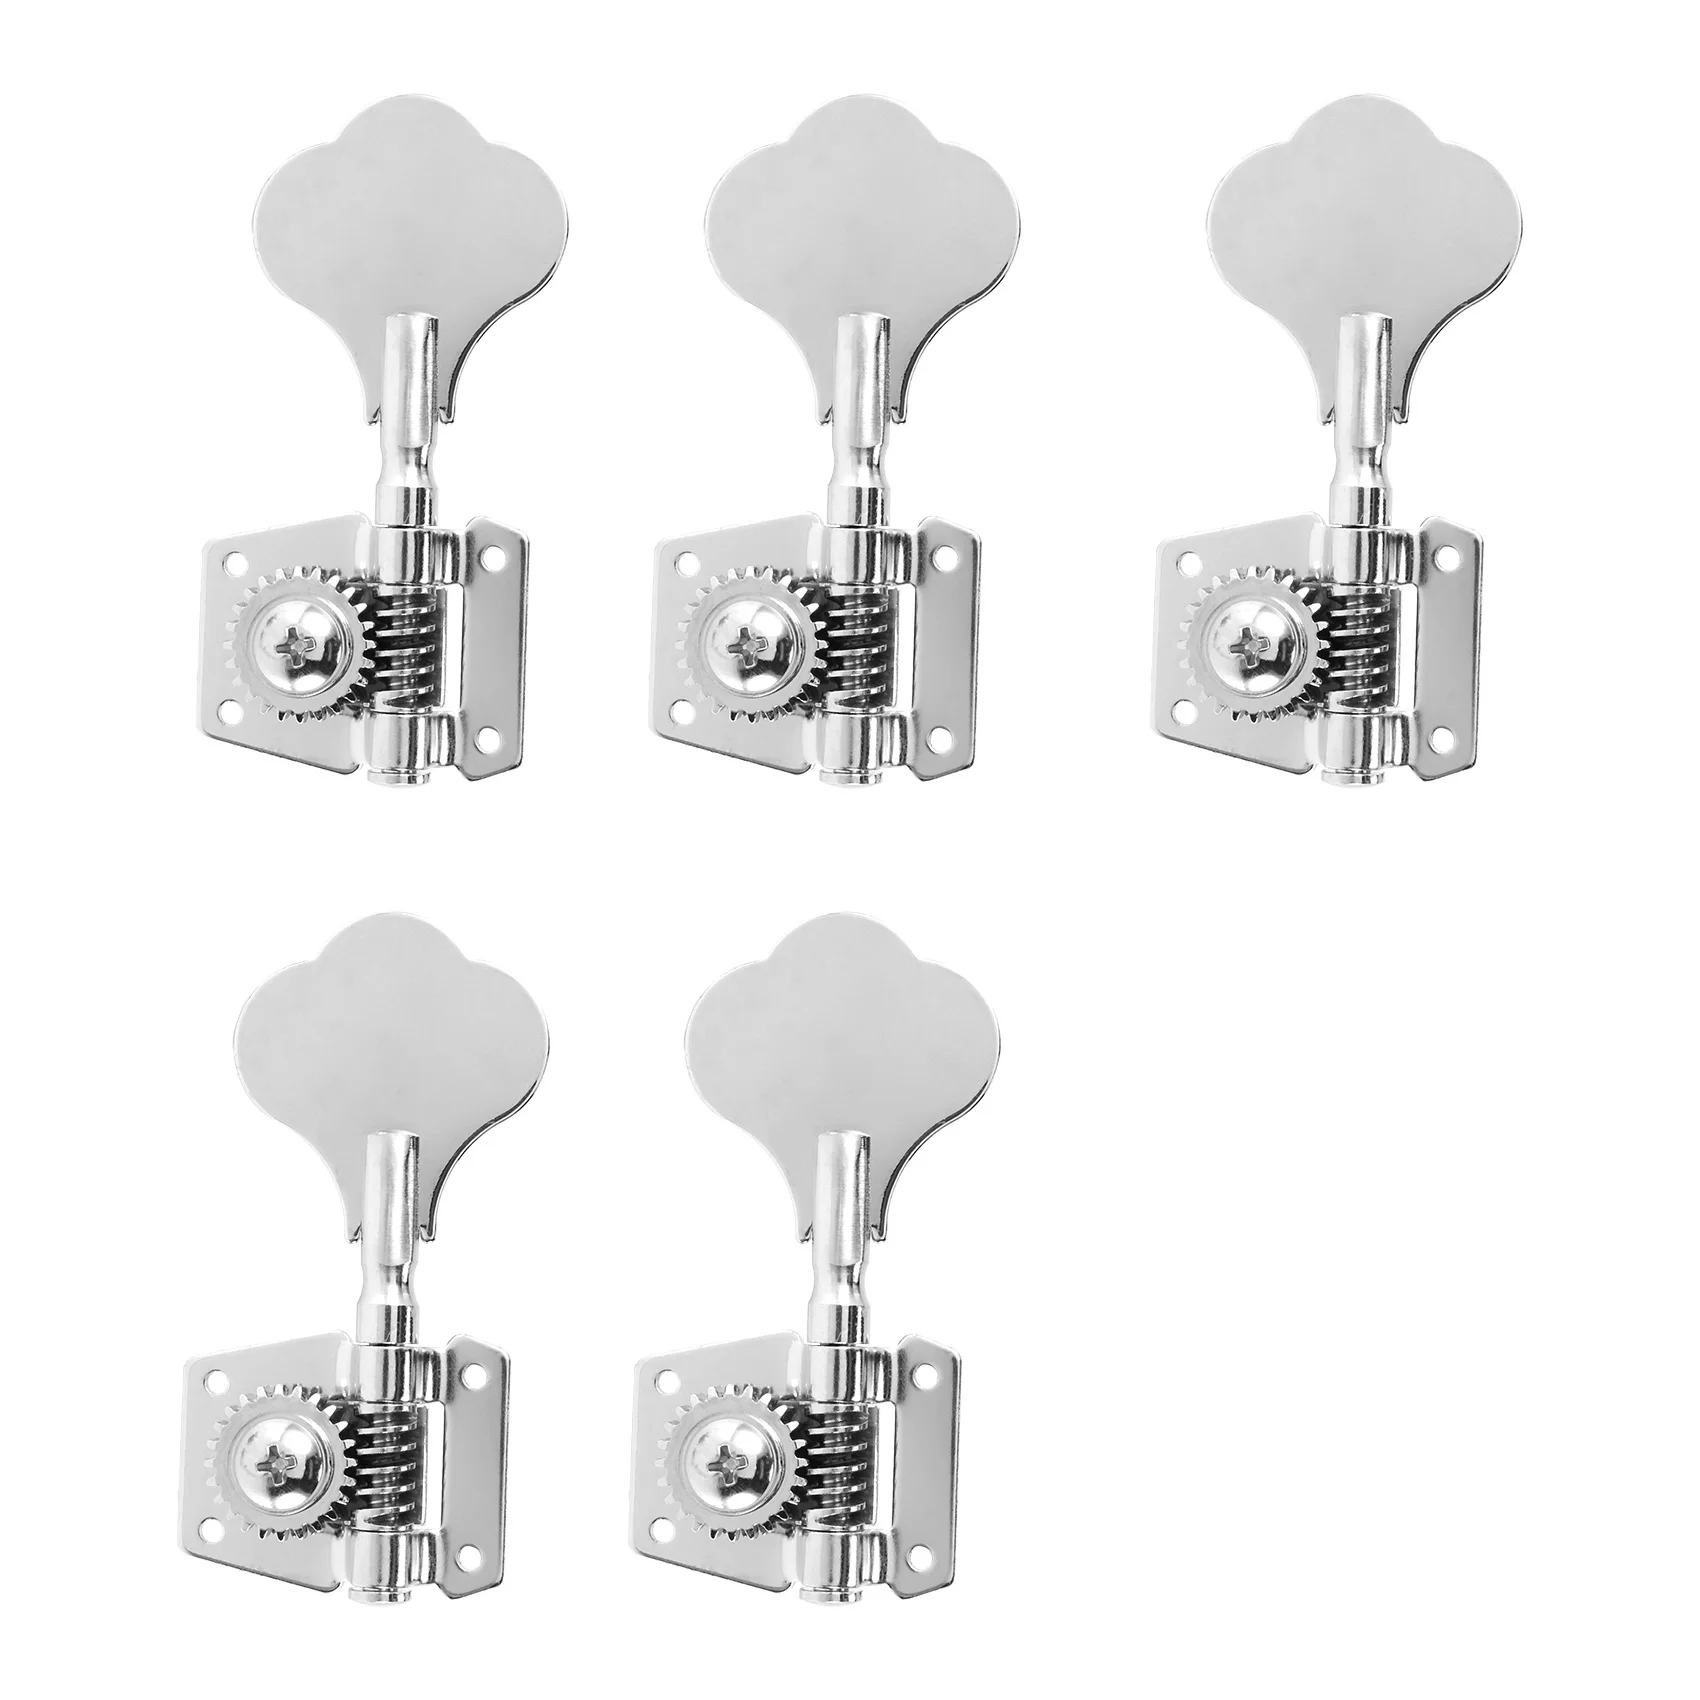 

5Pcs Guitar Accessory Vintage Open Guitar Tuning Keys Pegs Machine Heads Tuners Black 1L4R for 5 Strings Silver